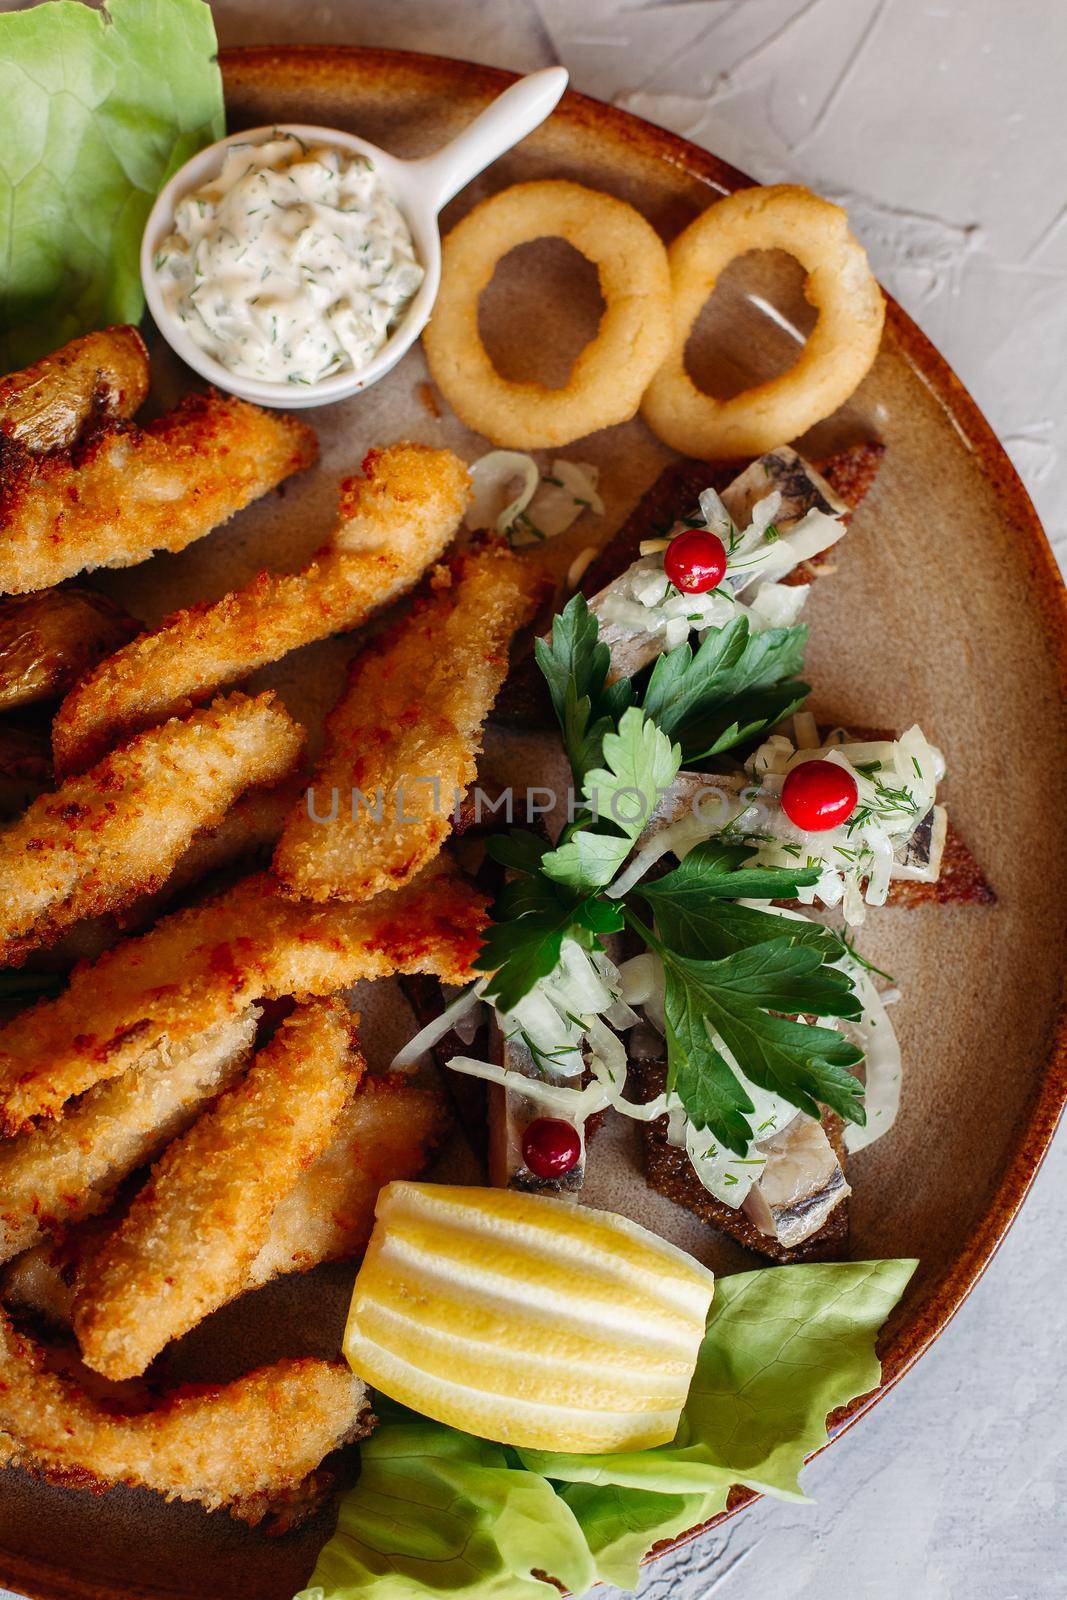 Clay plate full of appetizers served with goldy chicken nuggets cooked with chrispy crust, delicious canapes with herring and cherry tomatoes, garlic sauce, decorated with fresh salad and cheese.